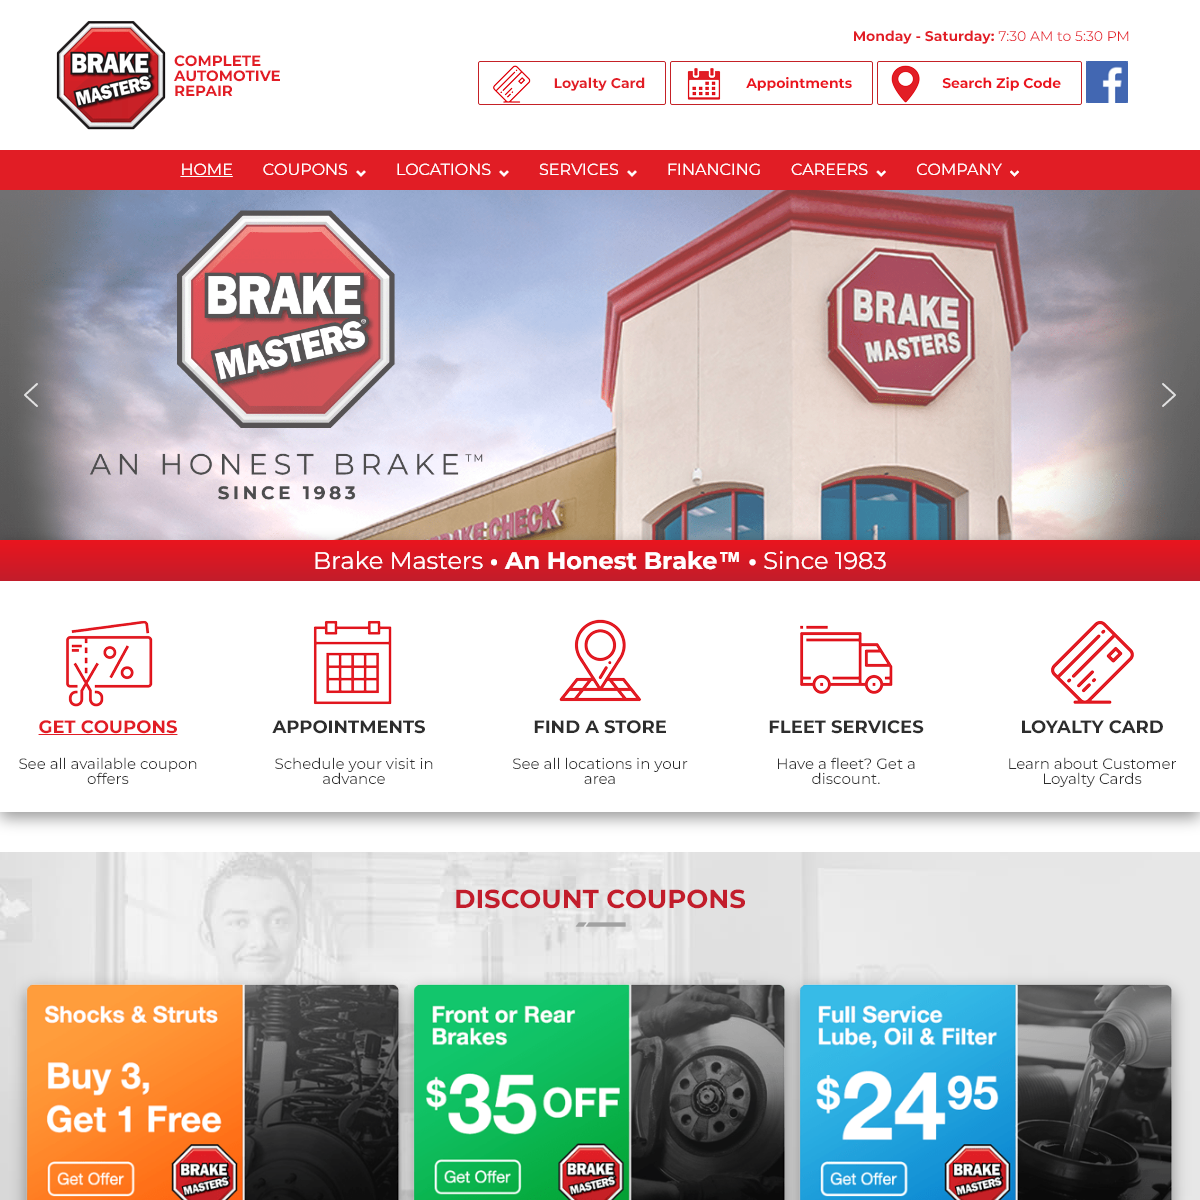 A complete backup of brakemasters.com